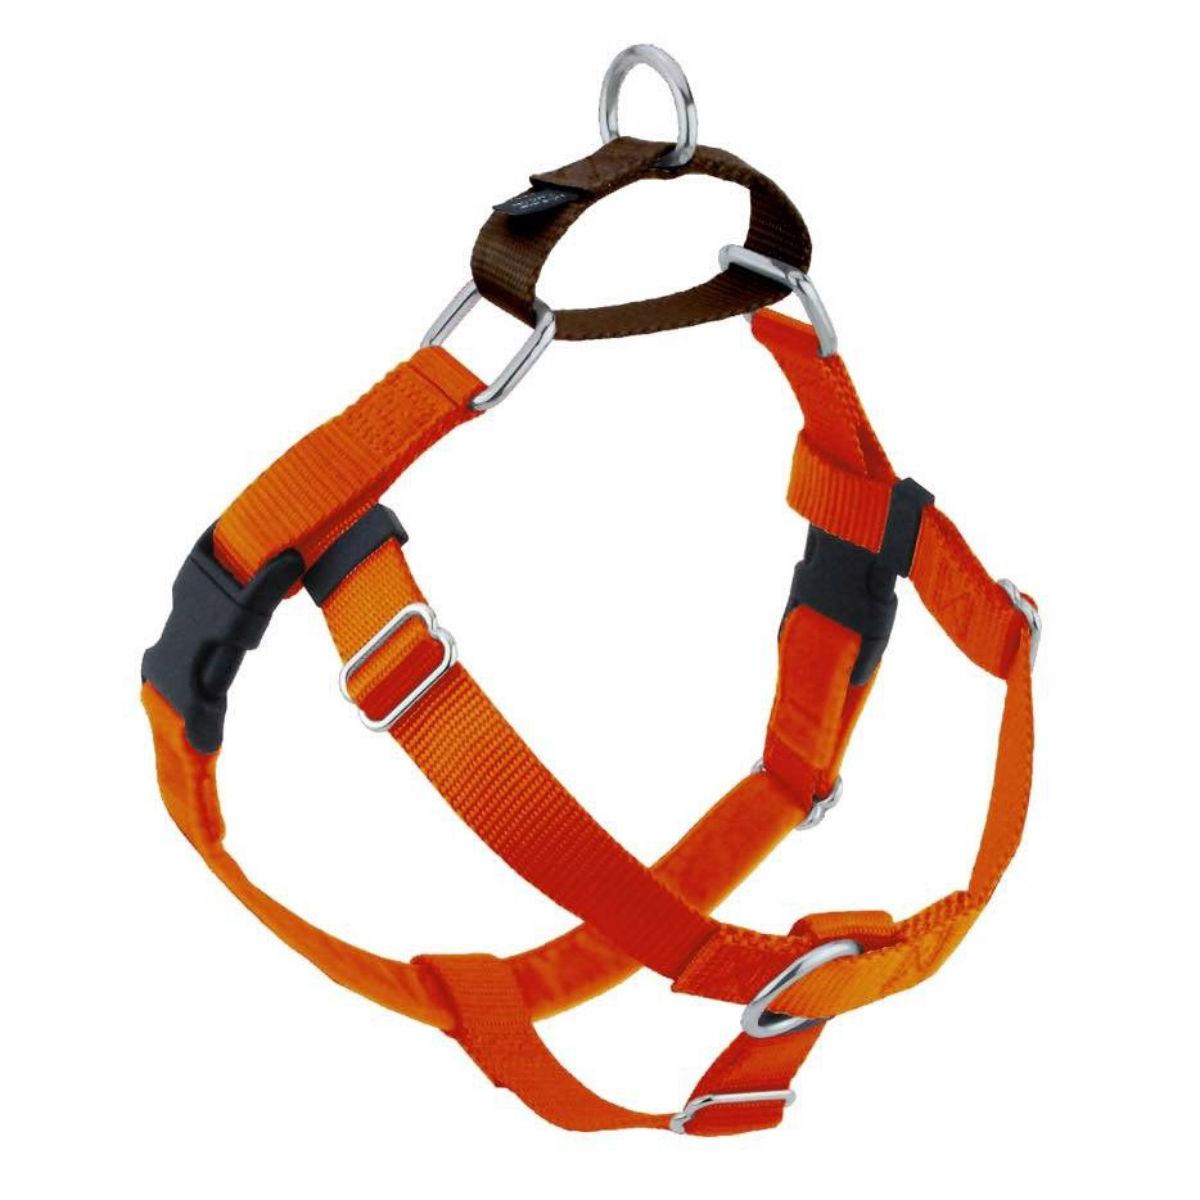 2 Hounds Design No-Pull Dog Harness Deluxe Training Package - Rust and Brown